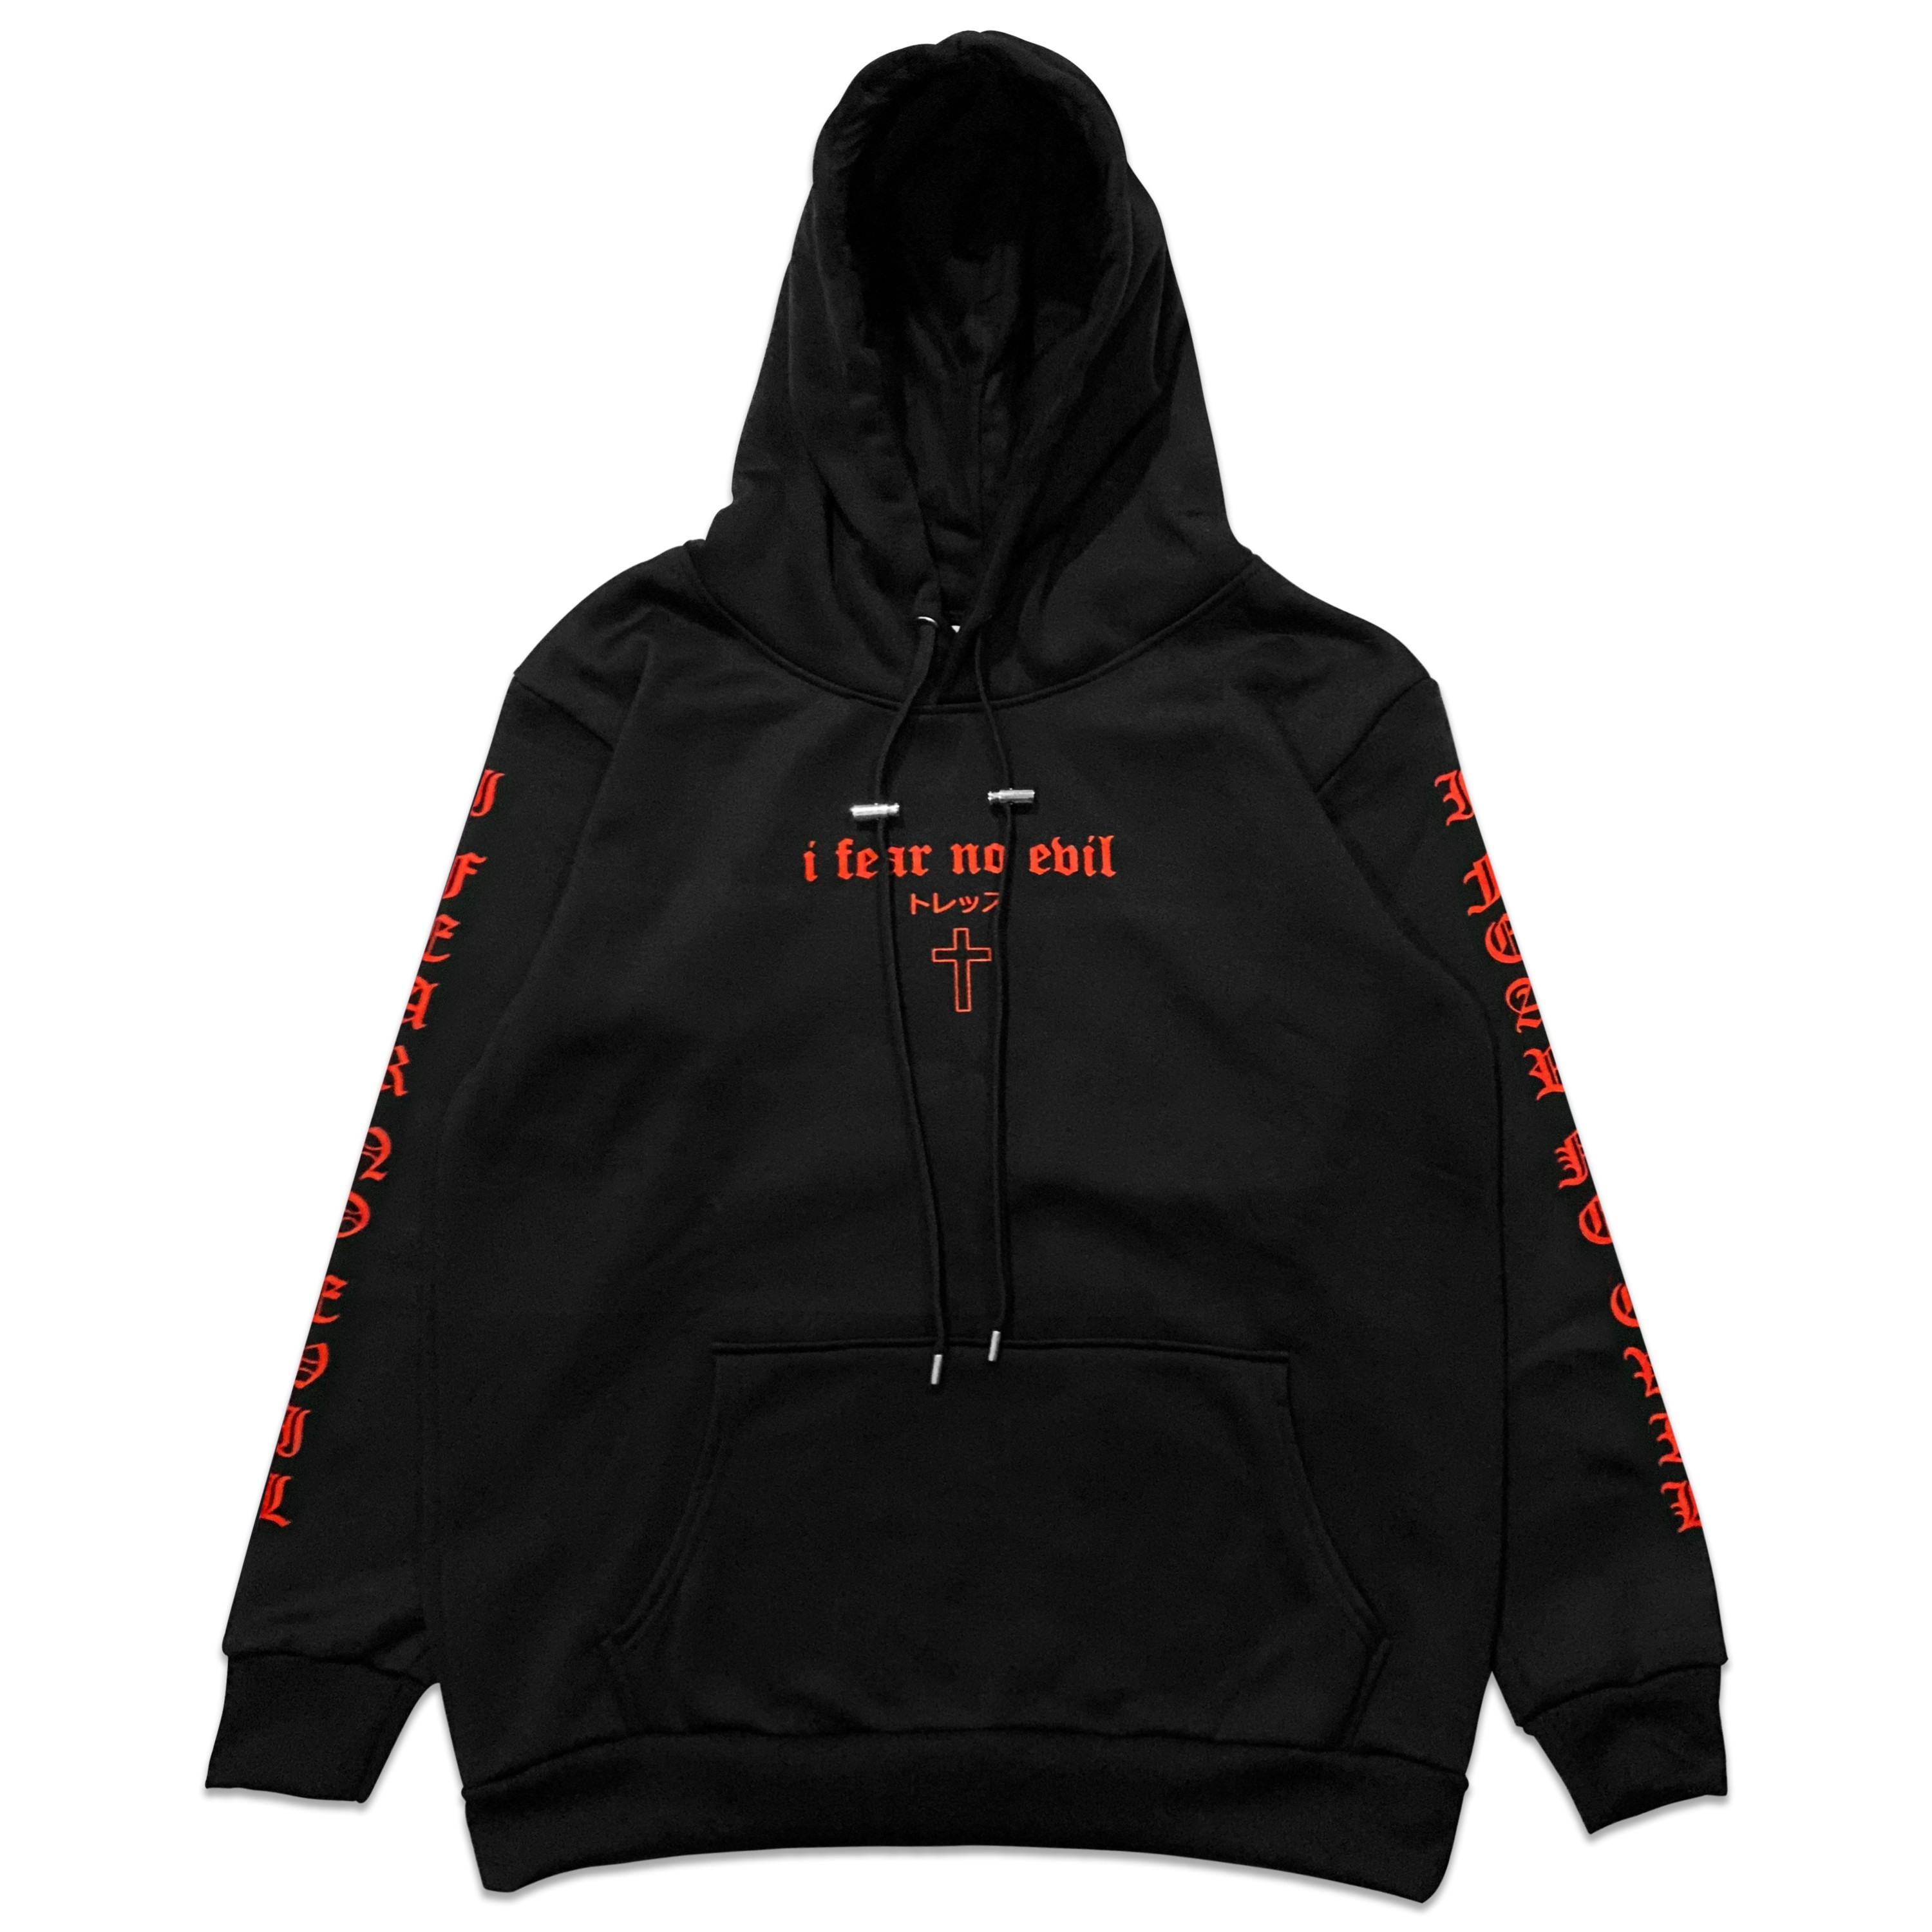 I Fear No Evil Hoodie - Black/Red Size S